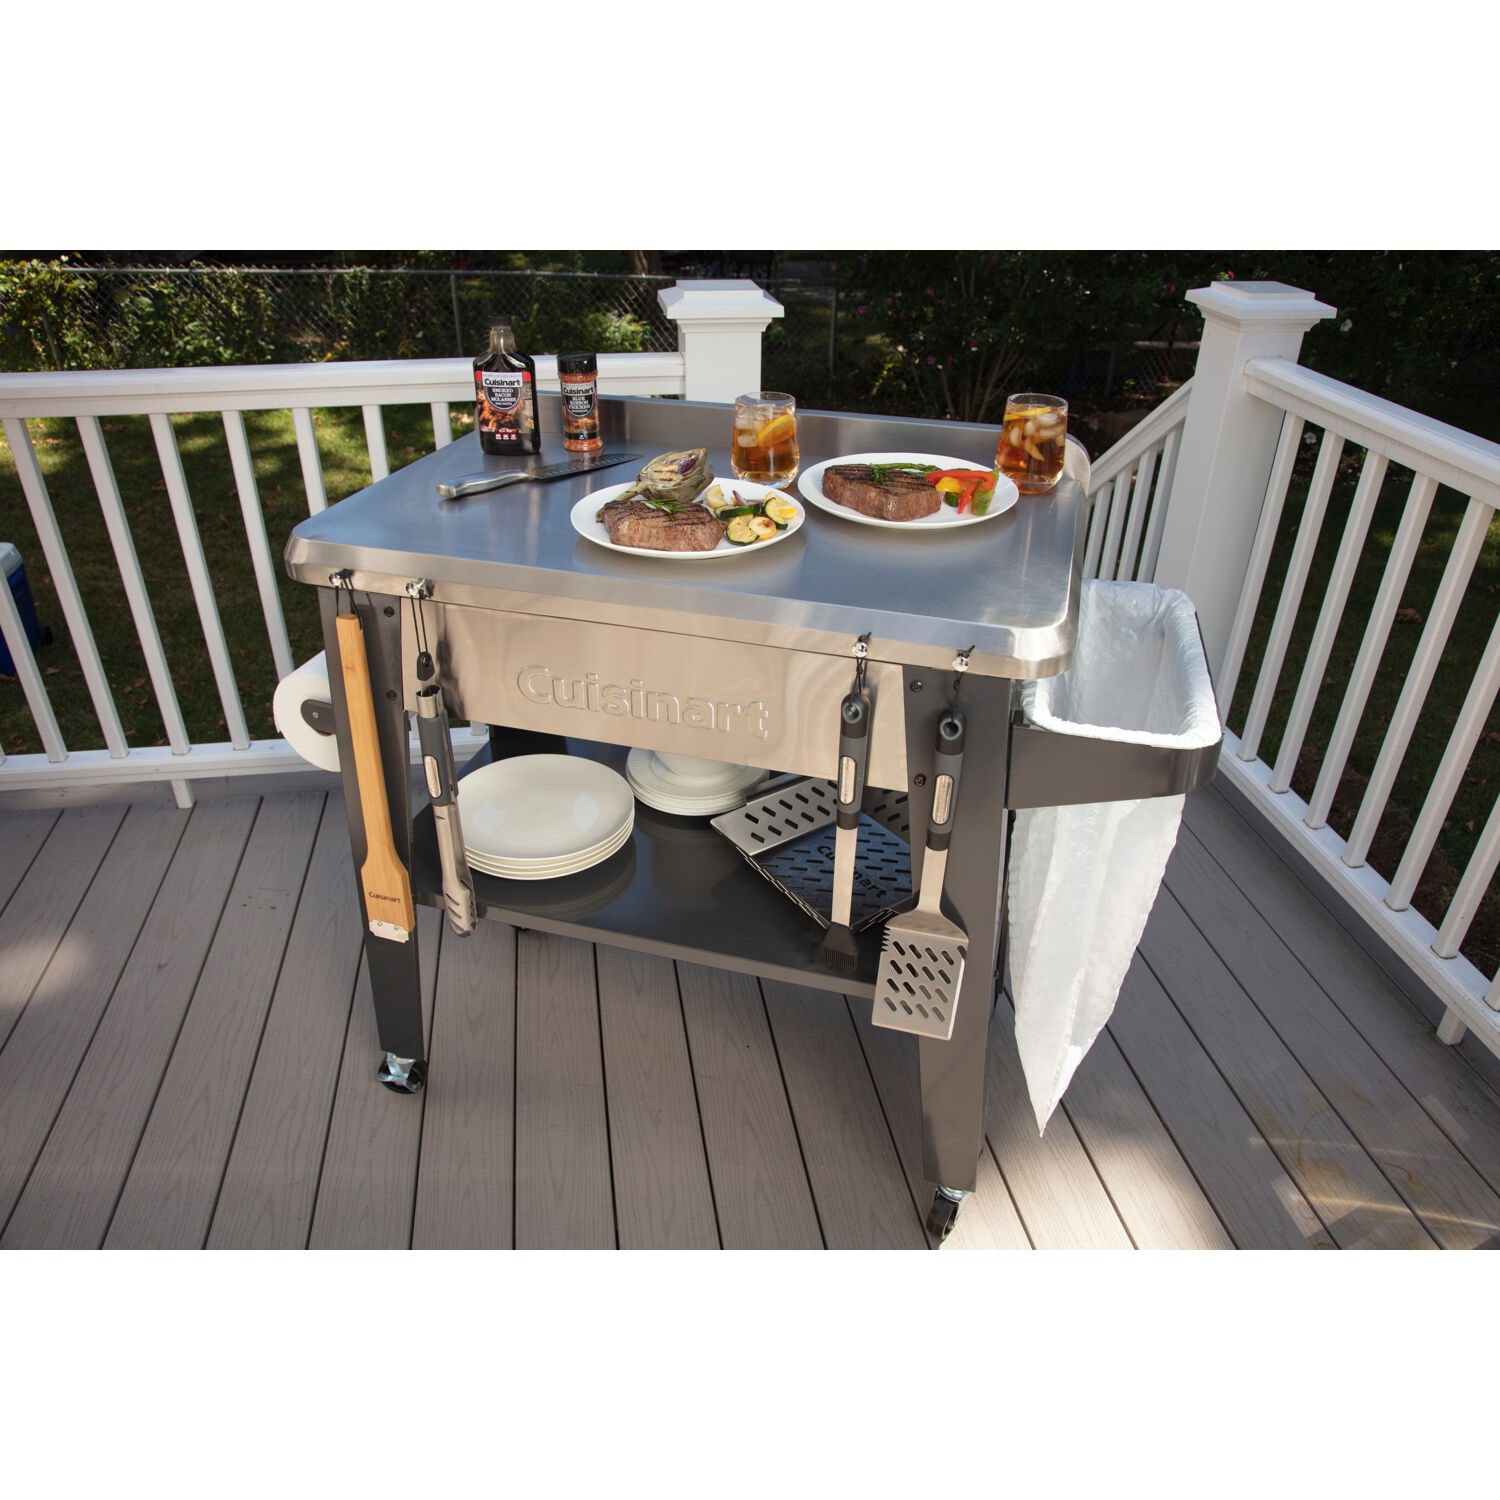 Prep station Grills & Outdoor Cooking at